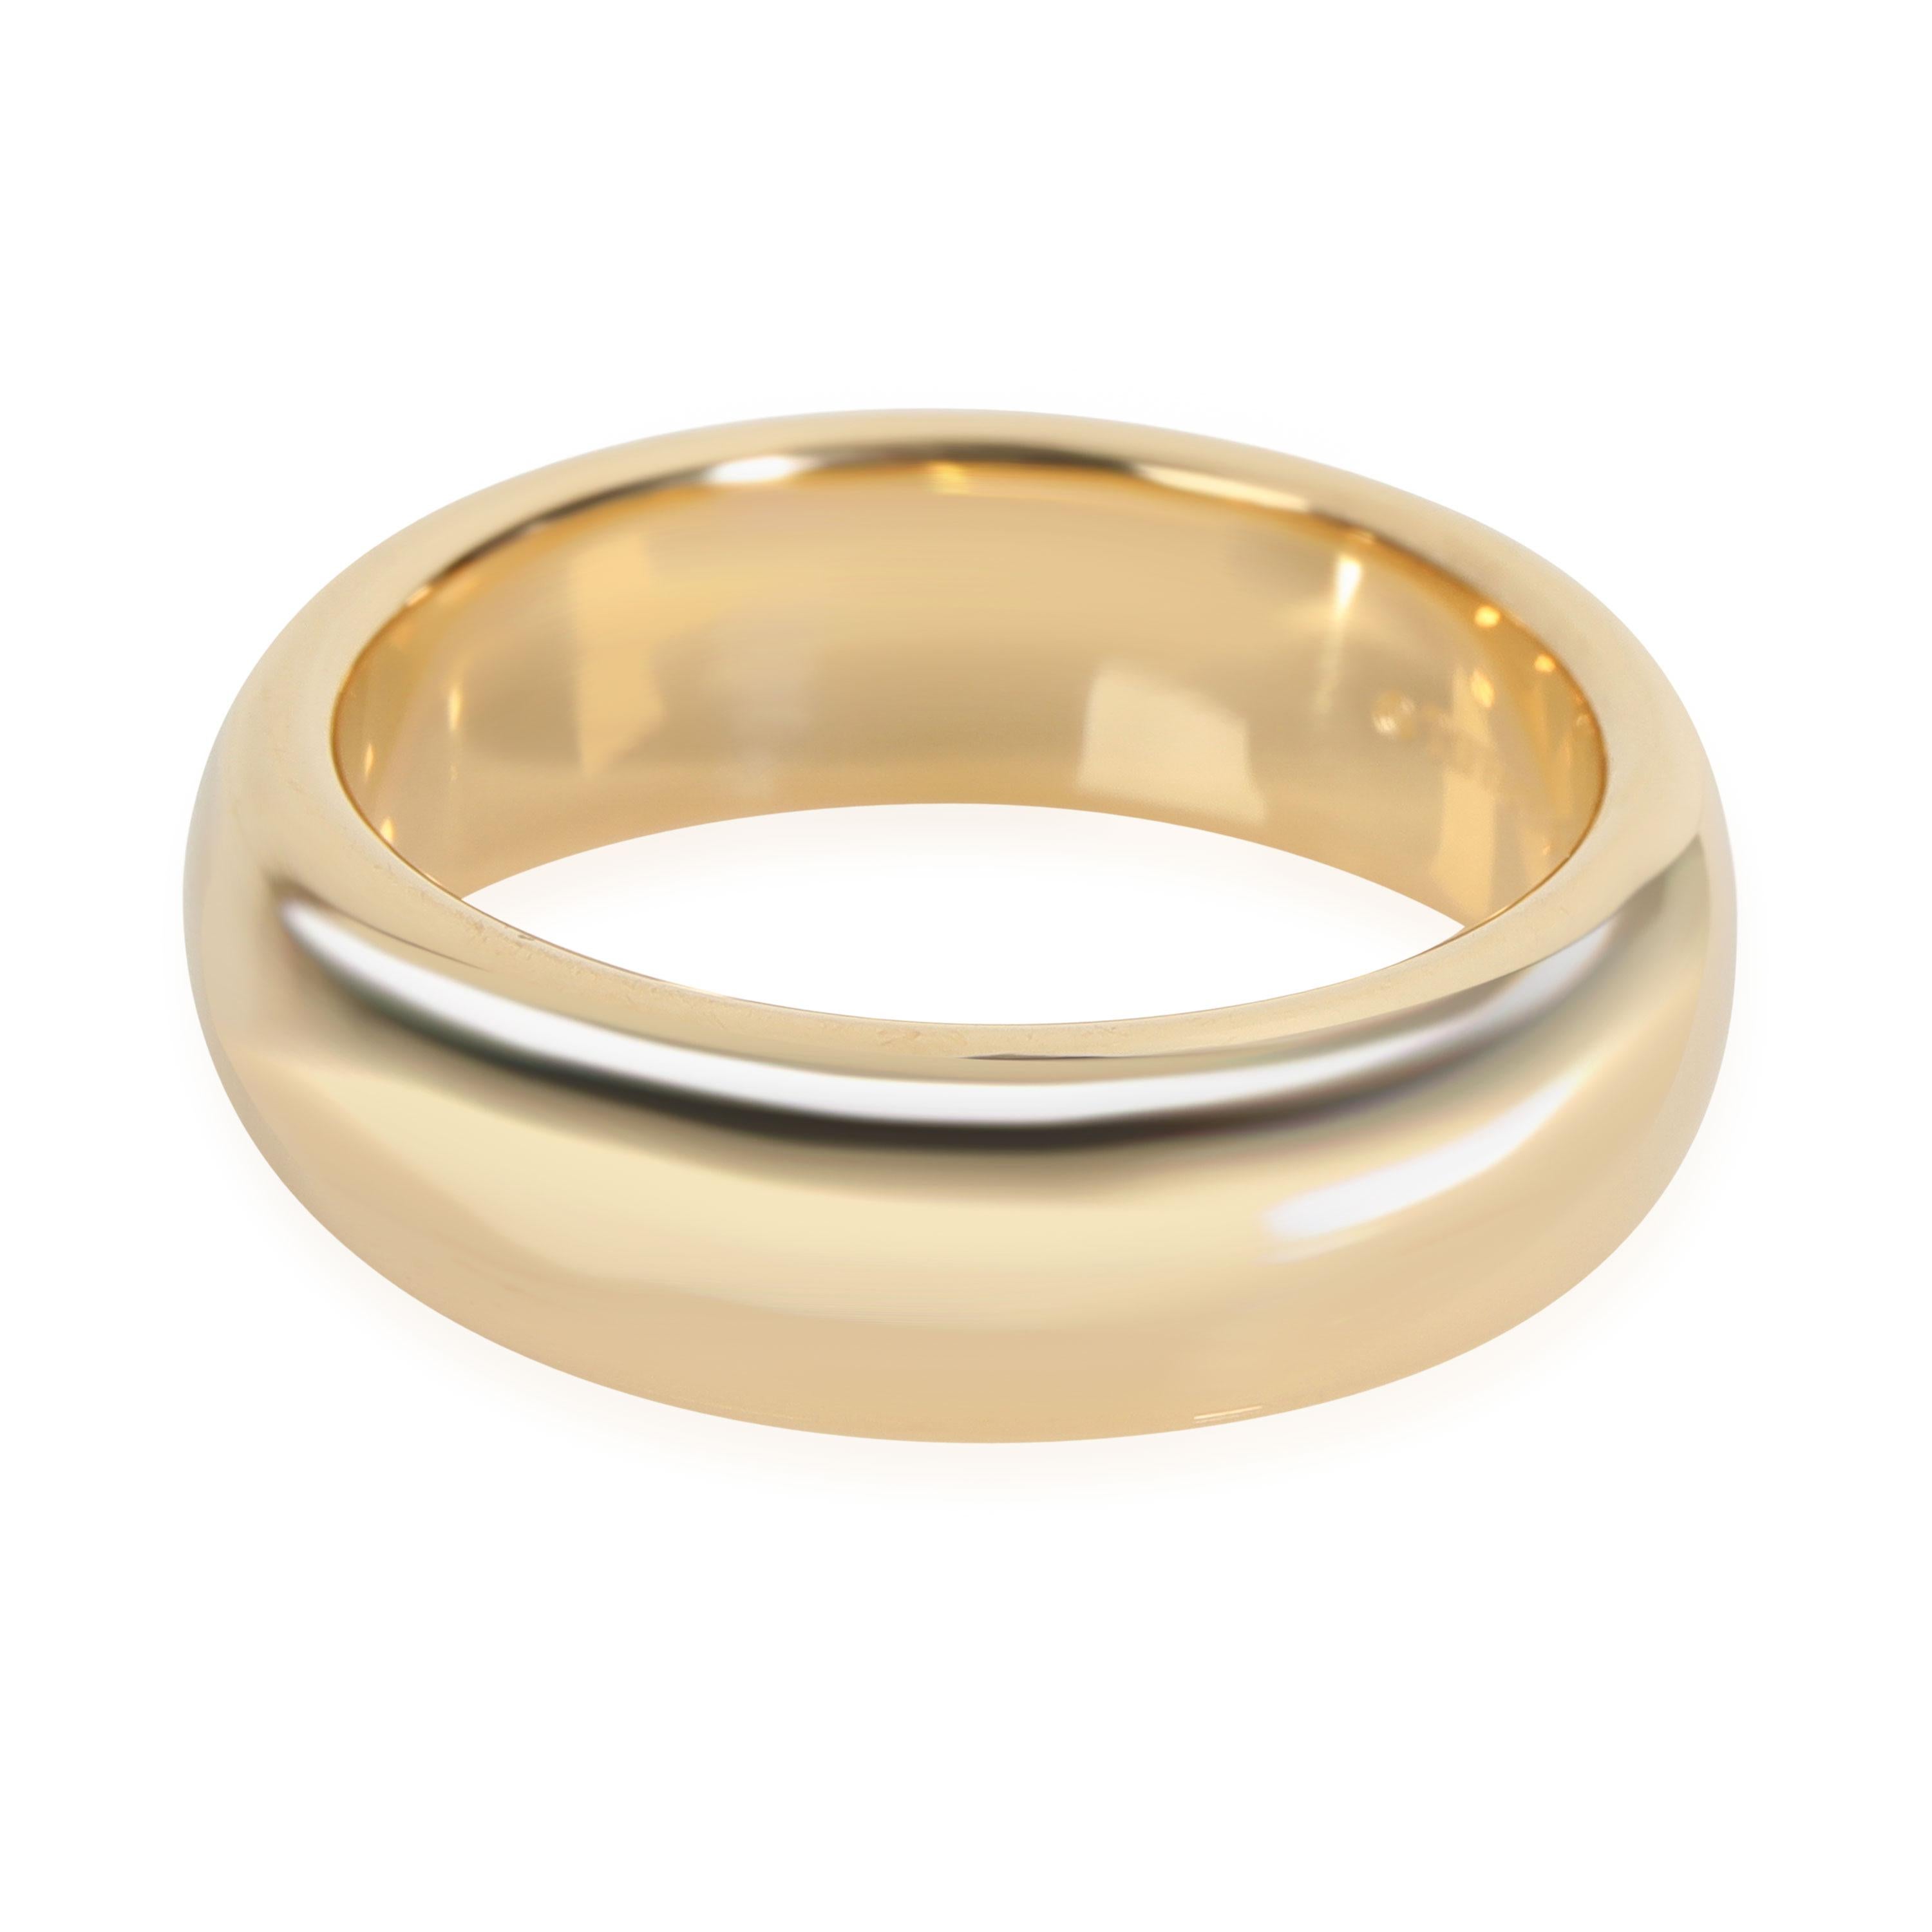 
Tiffany & Co. Classic Wedding Band in 18K Yellow Gold

PRIMARY DETAILS
SKU: 111094
Listing Title: Tiffany & Co. Classic Wedding Band in 18K Yellow Gold
Condition Description: Retails for 1600 USD. In excellent condition and recently polished. Ring